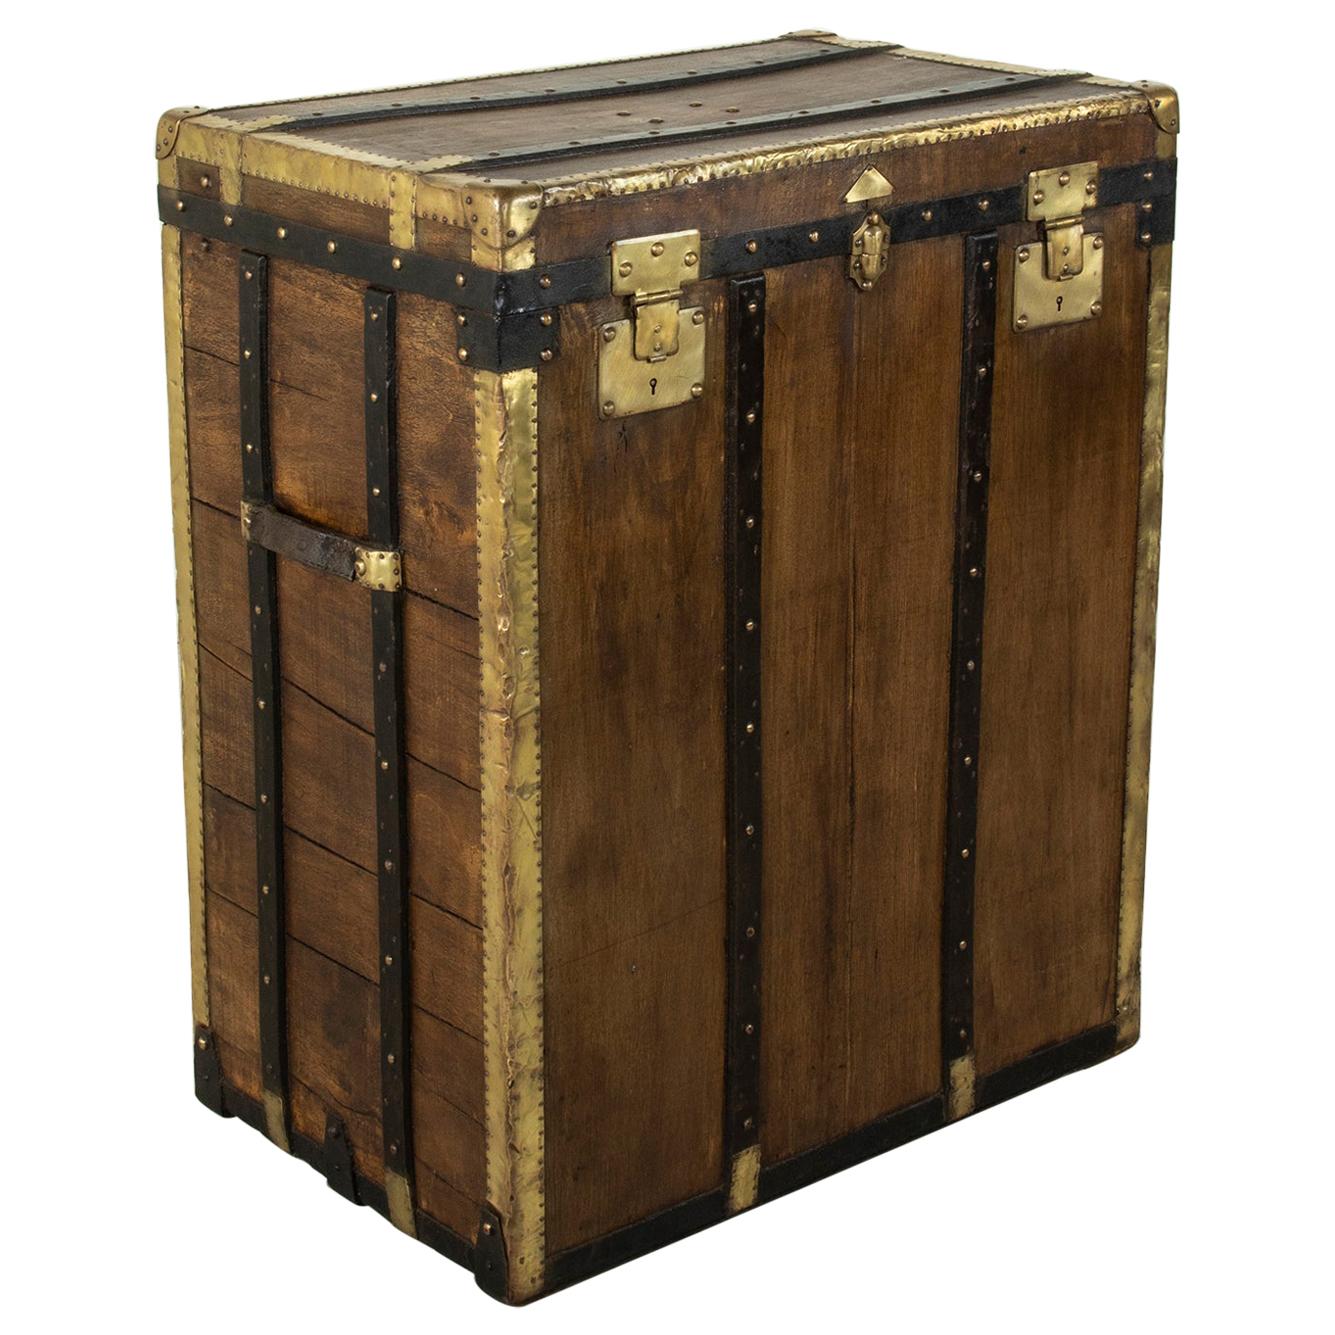 Tall Early 20th Century French Beech Wood Steamer Trunk by Malard, E&M in Paris